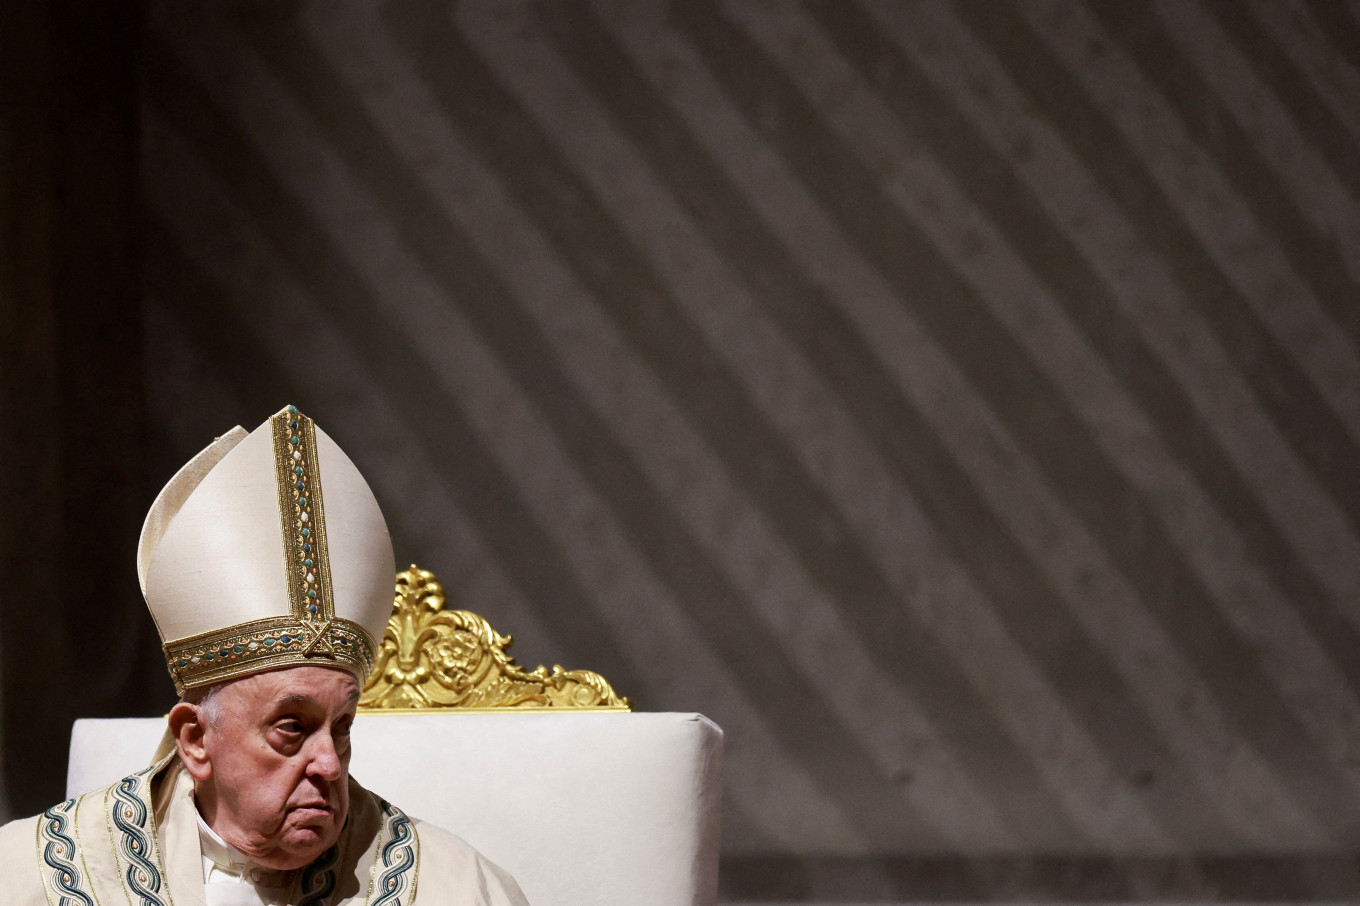 Europe’s democracy is suffering, according to Pope Francis.